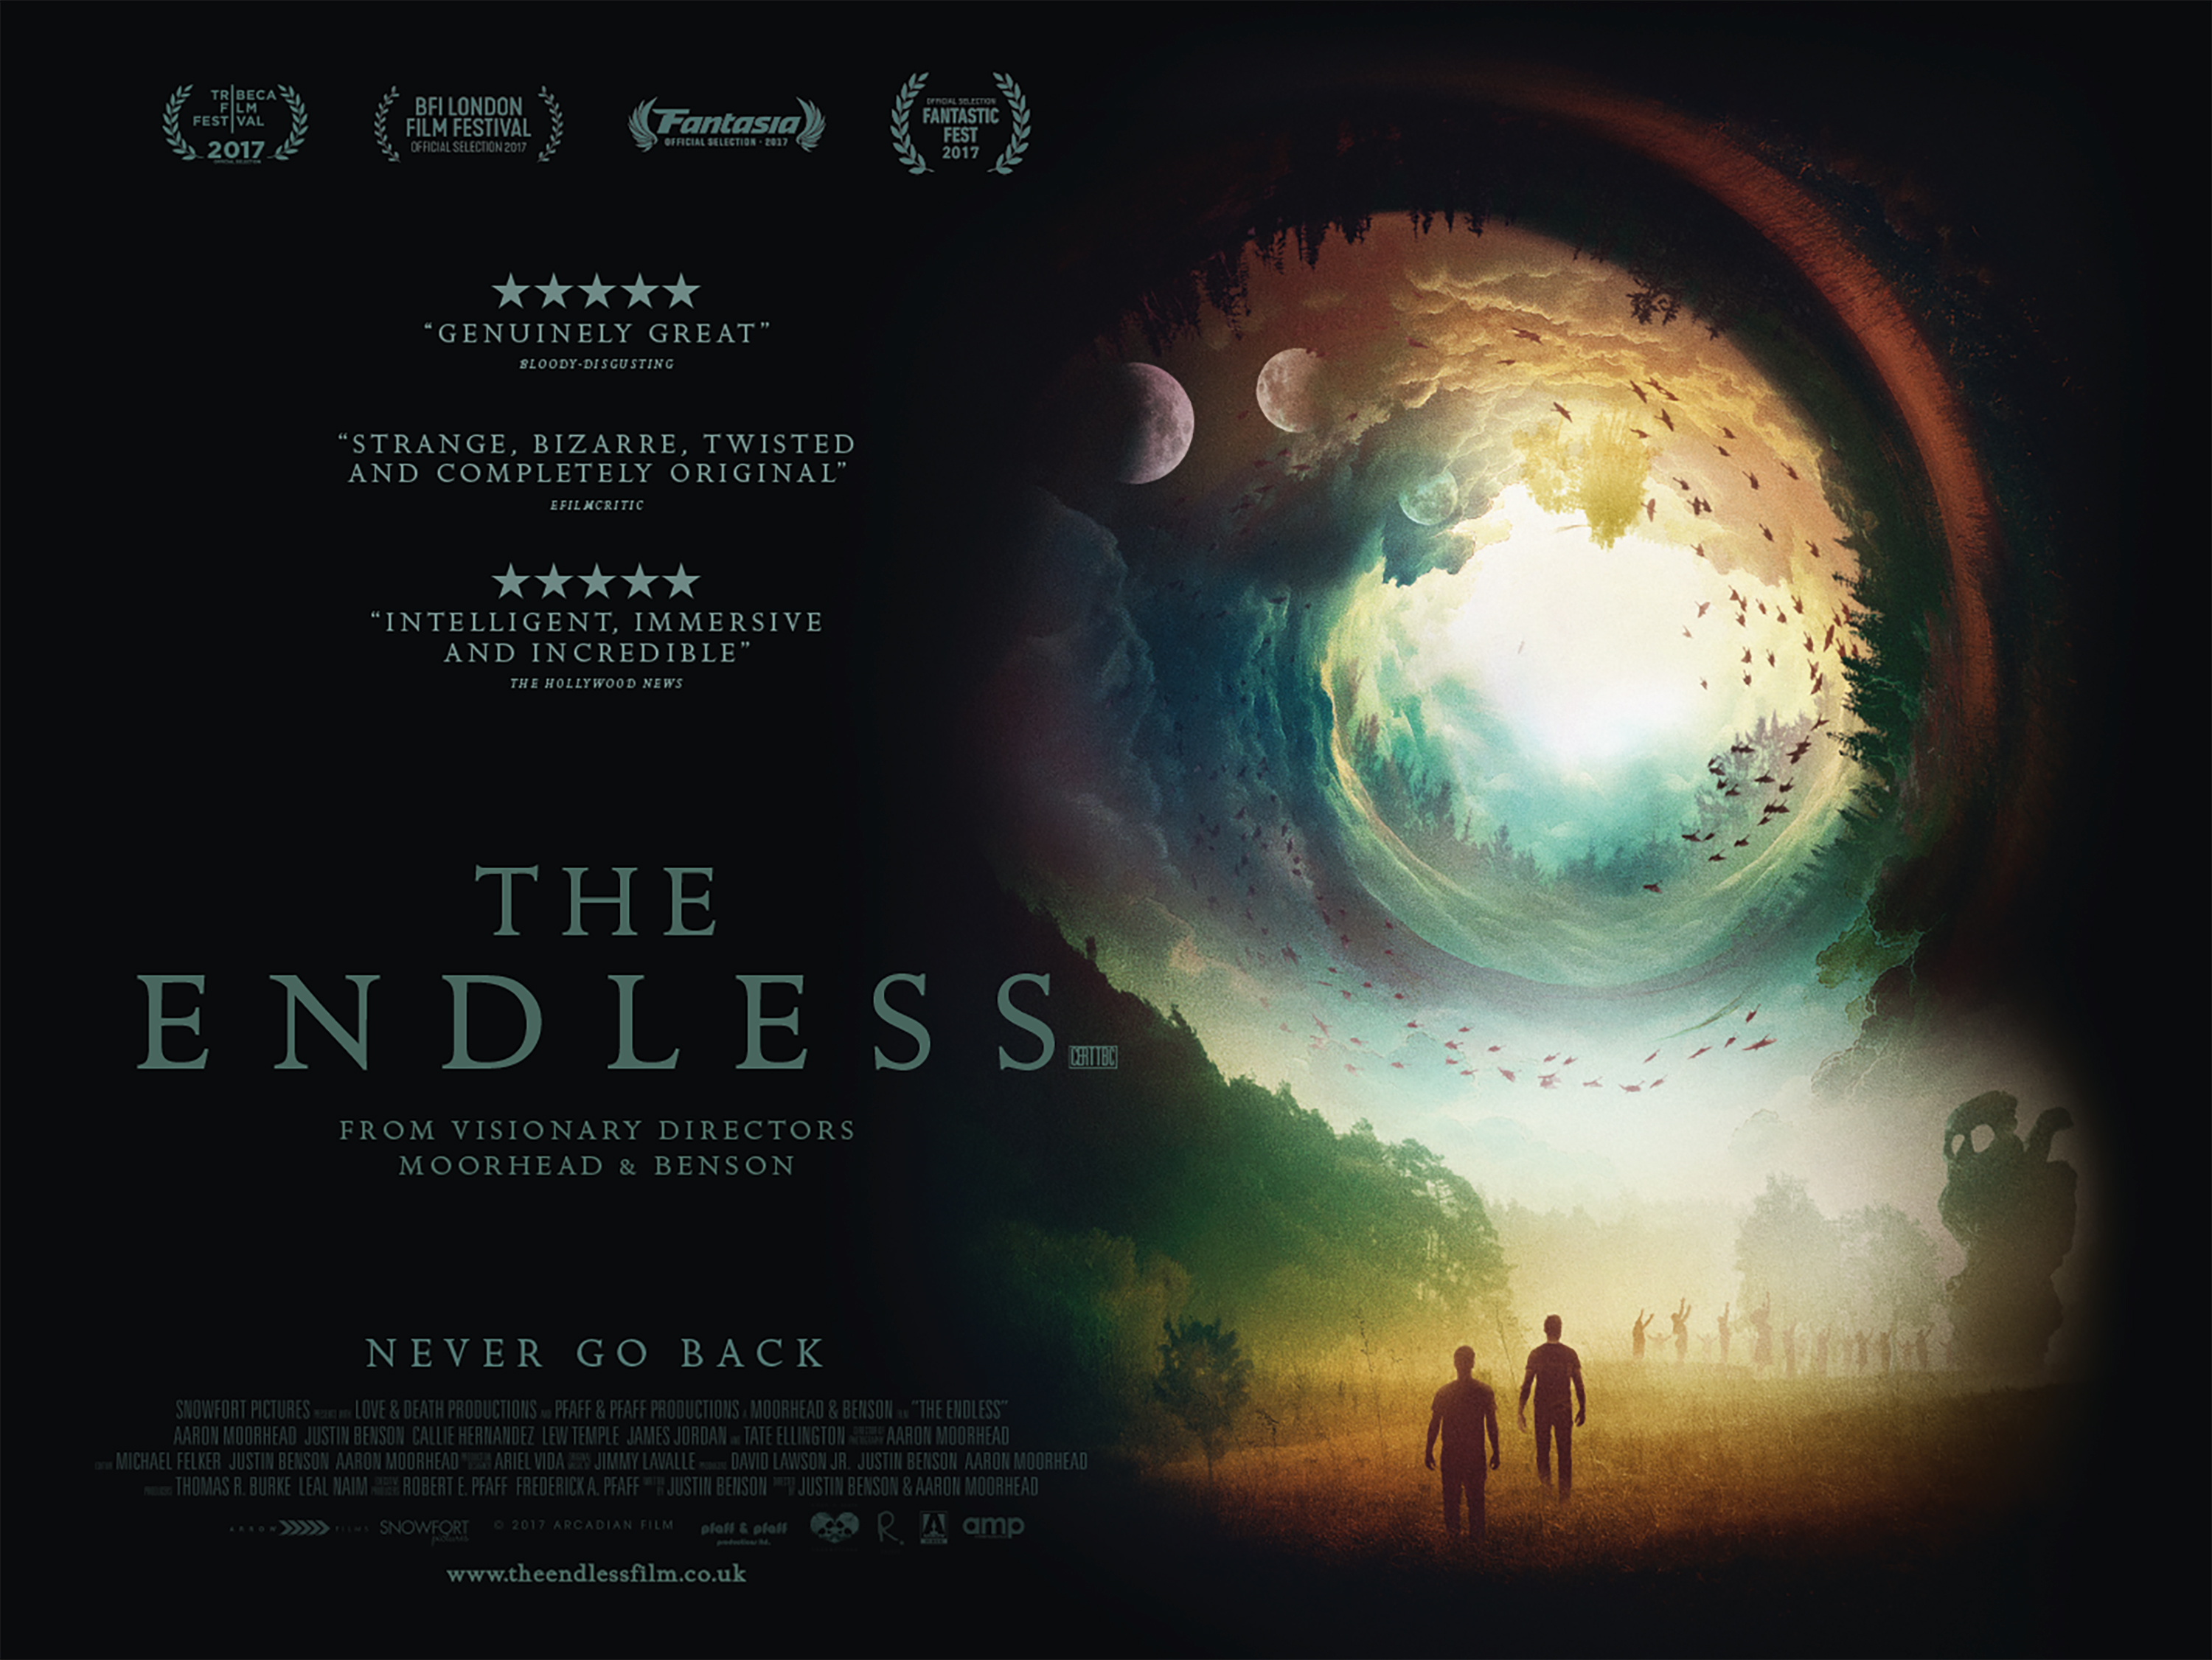 The Endless film review: Benson and Moorhead return with a spellbinding SF